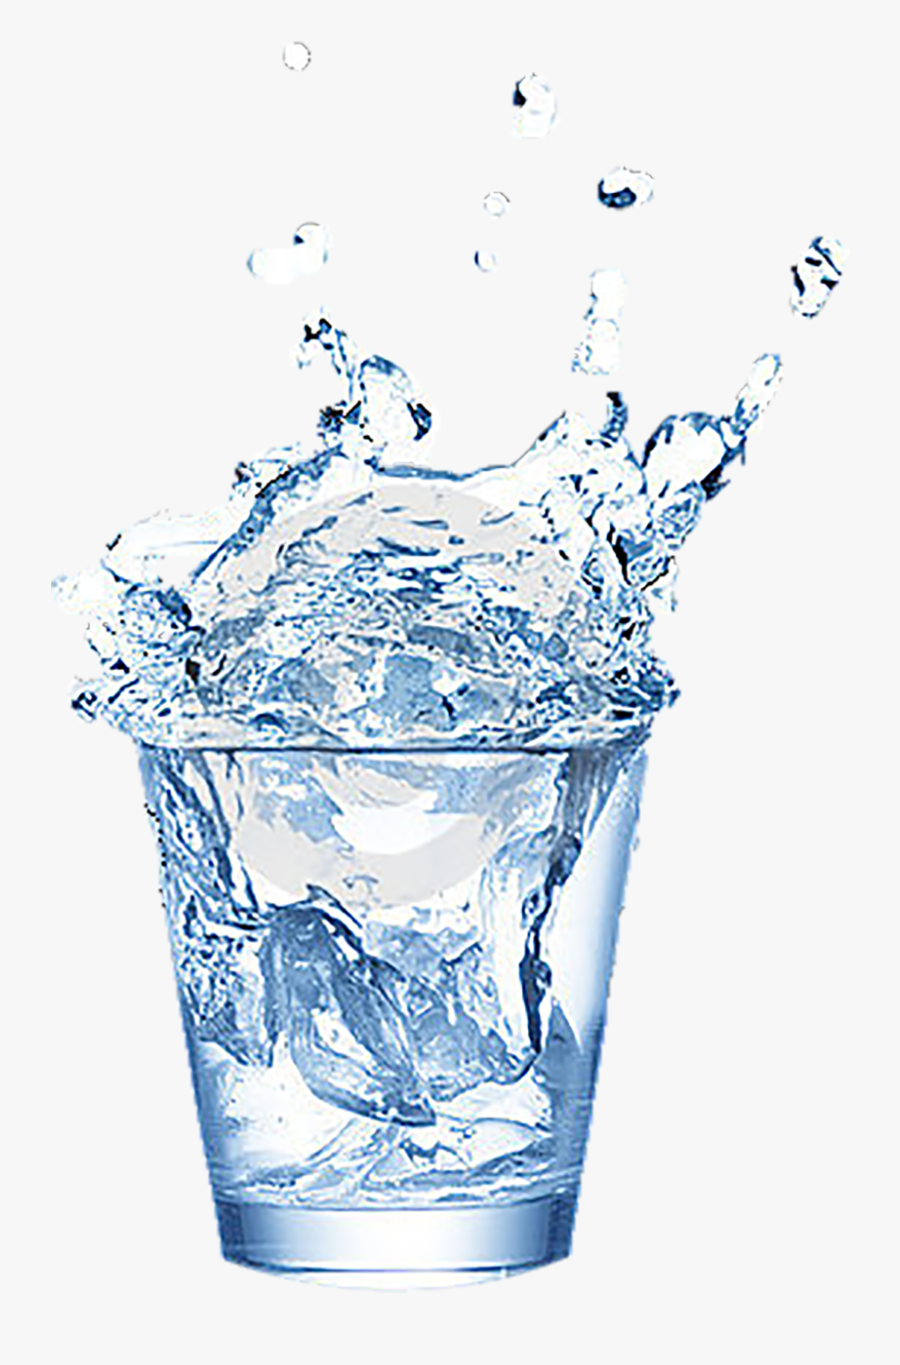 Water - Water Drink Transparent Background, Transparent Clipart